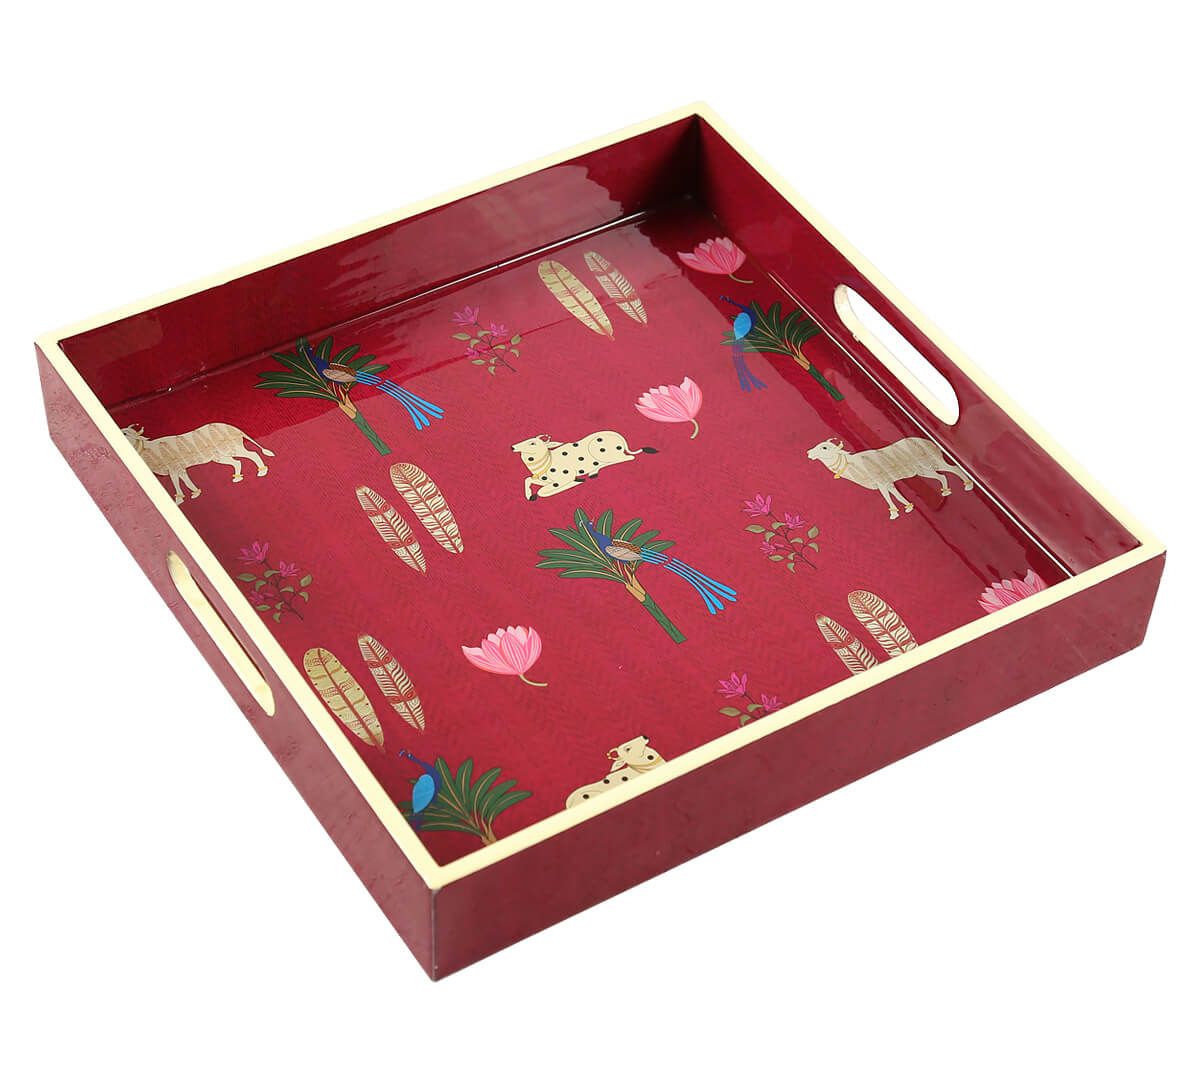 India Circus by Krsnaa Mehta Magenta Biome Mystique MDF Square Tray